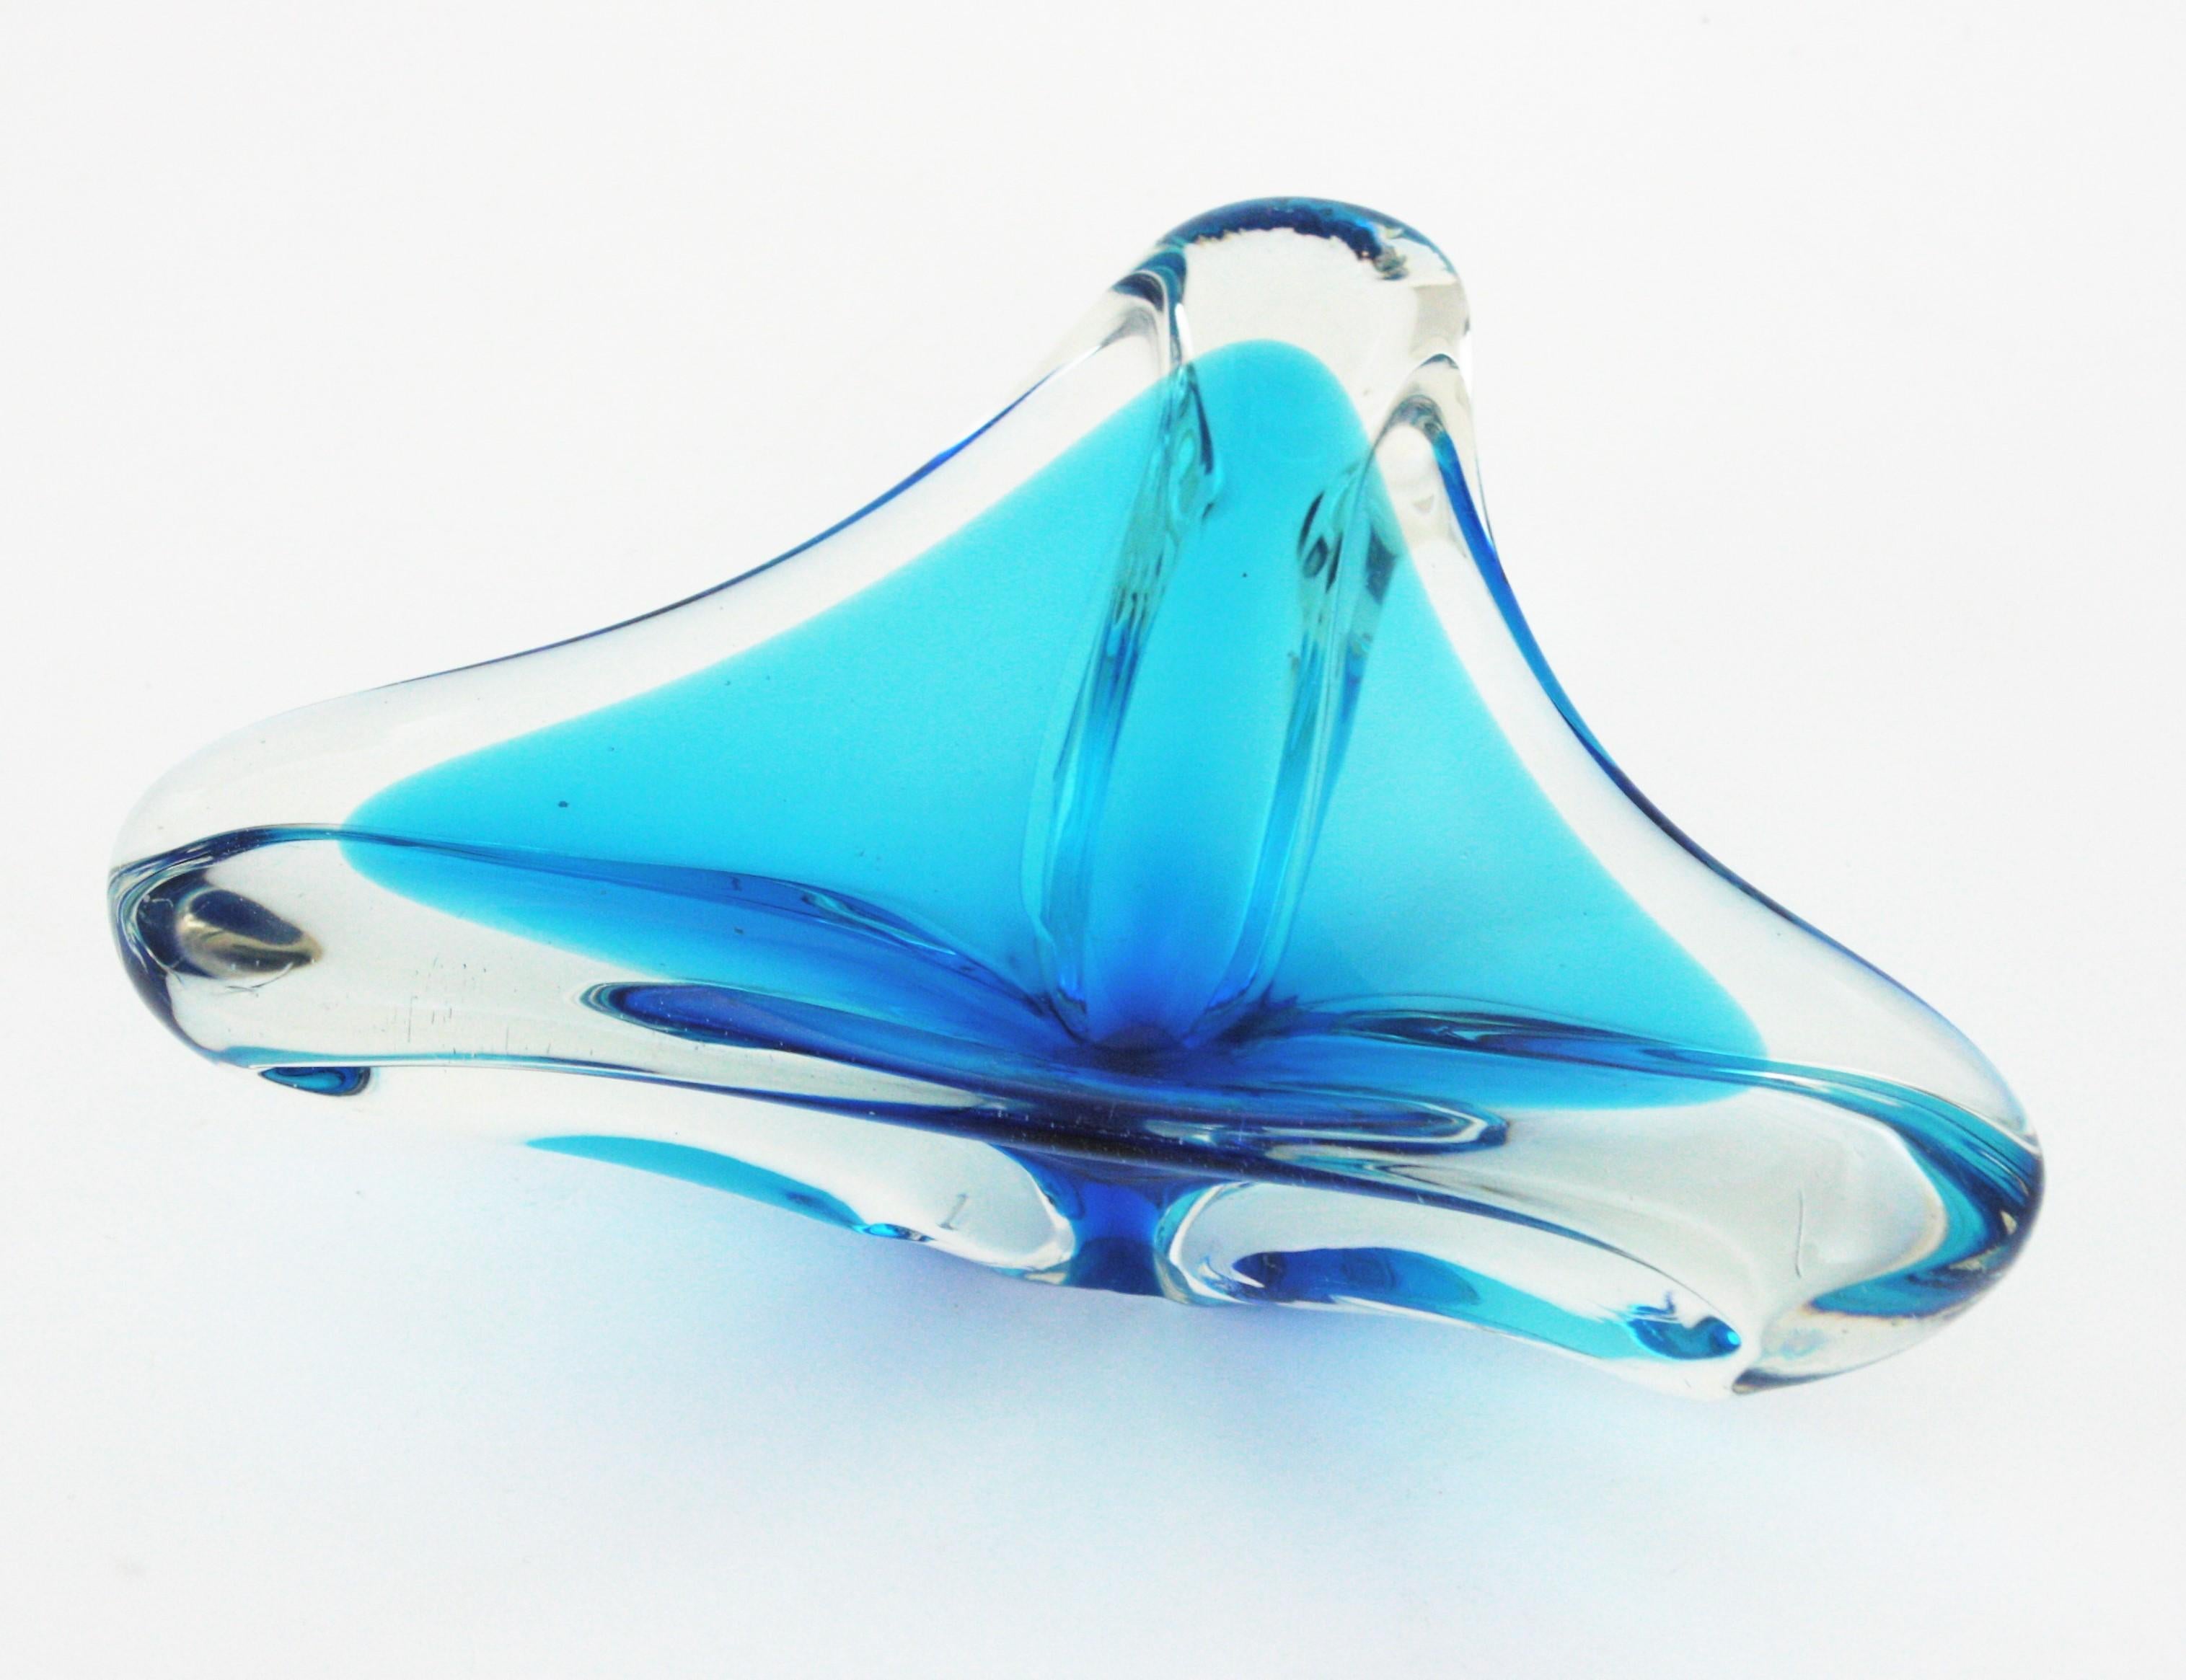 Mid-Century Modern aqua blue organic Murano glass Sommerso bowl /ashtray / vide-poche, Italy, 1950s.
A highly decorative hand blown Murano art glass triangular bowl with aqua blue glass cased into clear glass.
Use it as candy bowl, vide-poche,